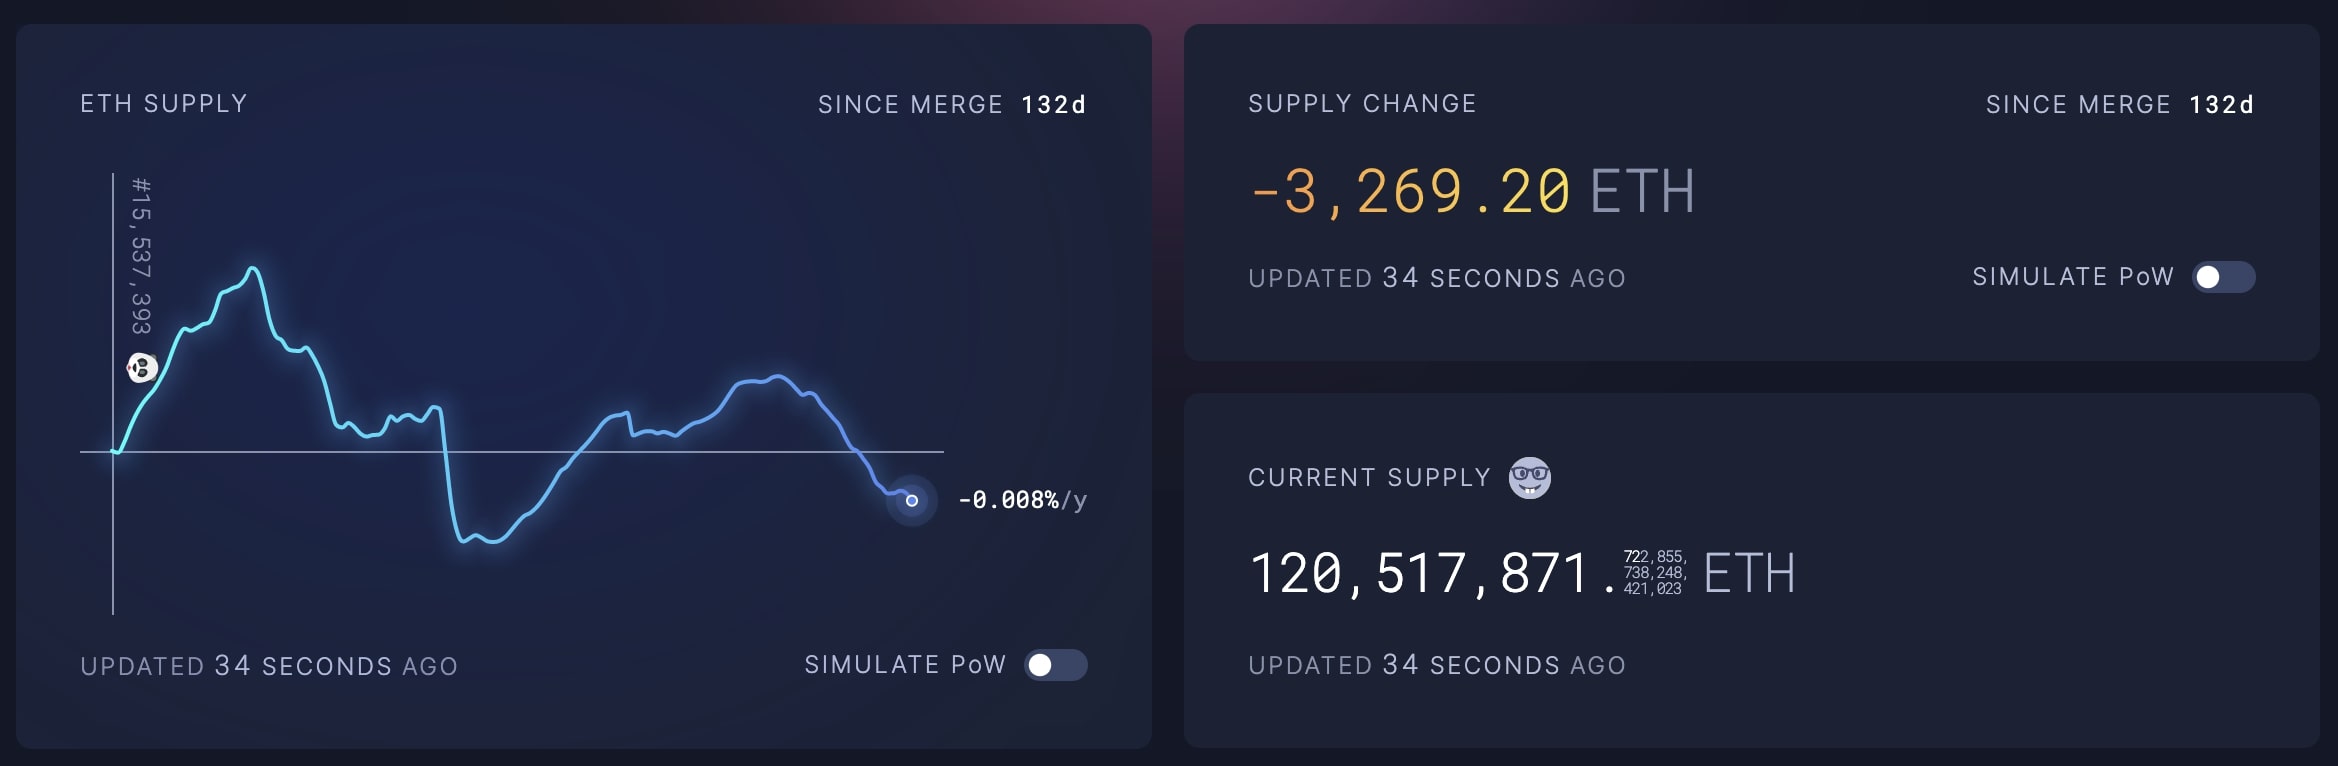 Reduced ETH supply after Merge